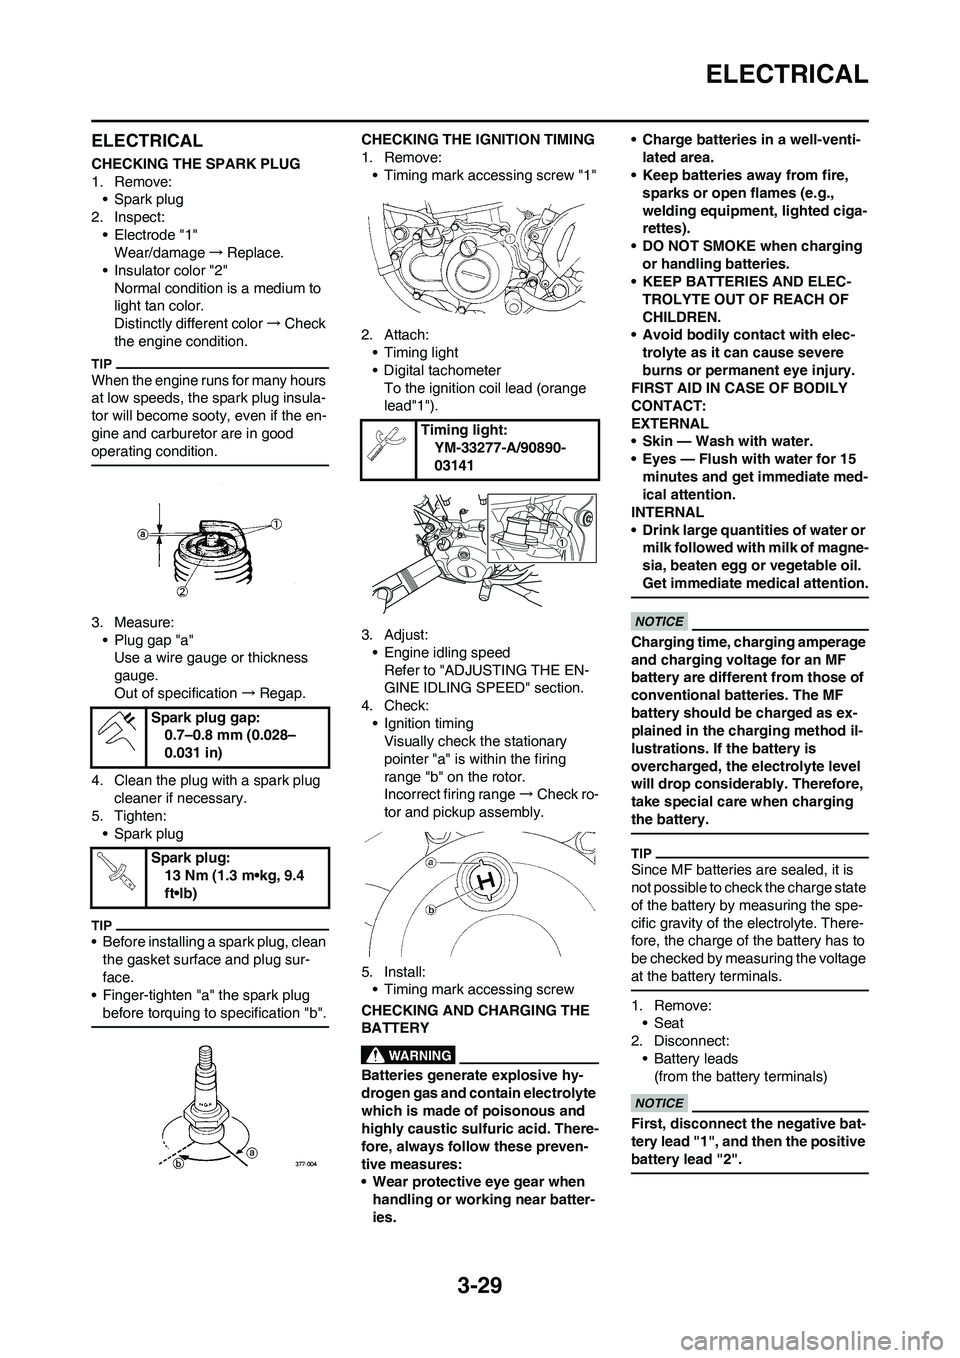 YAMAHA WR 450F 2011  Owners Manual 3-29
ELECTRICAL
ELECTRICAL
CHECKING THE SPARK PLUG
1. Remove:
• Spark plug
2. Inspect:
• Electrode "1"
Wear/damage→Replace.
• Insulator color "2"
Normal condition is a medium to 
light tan col